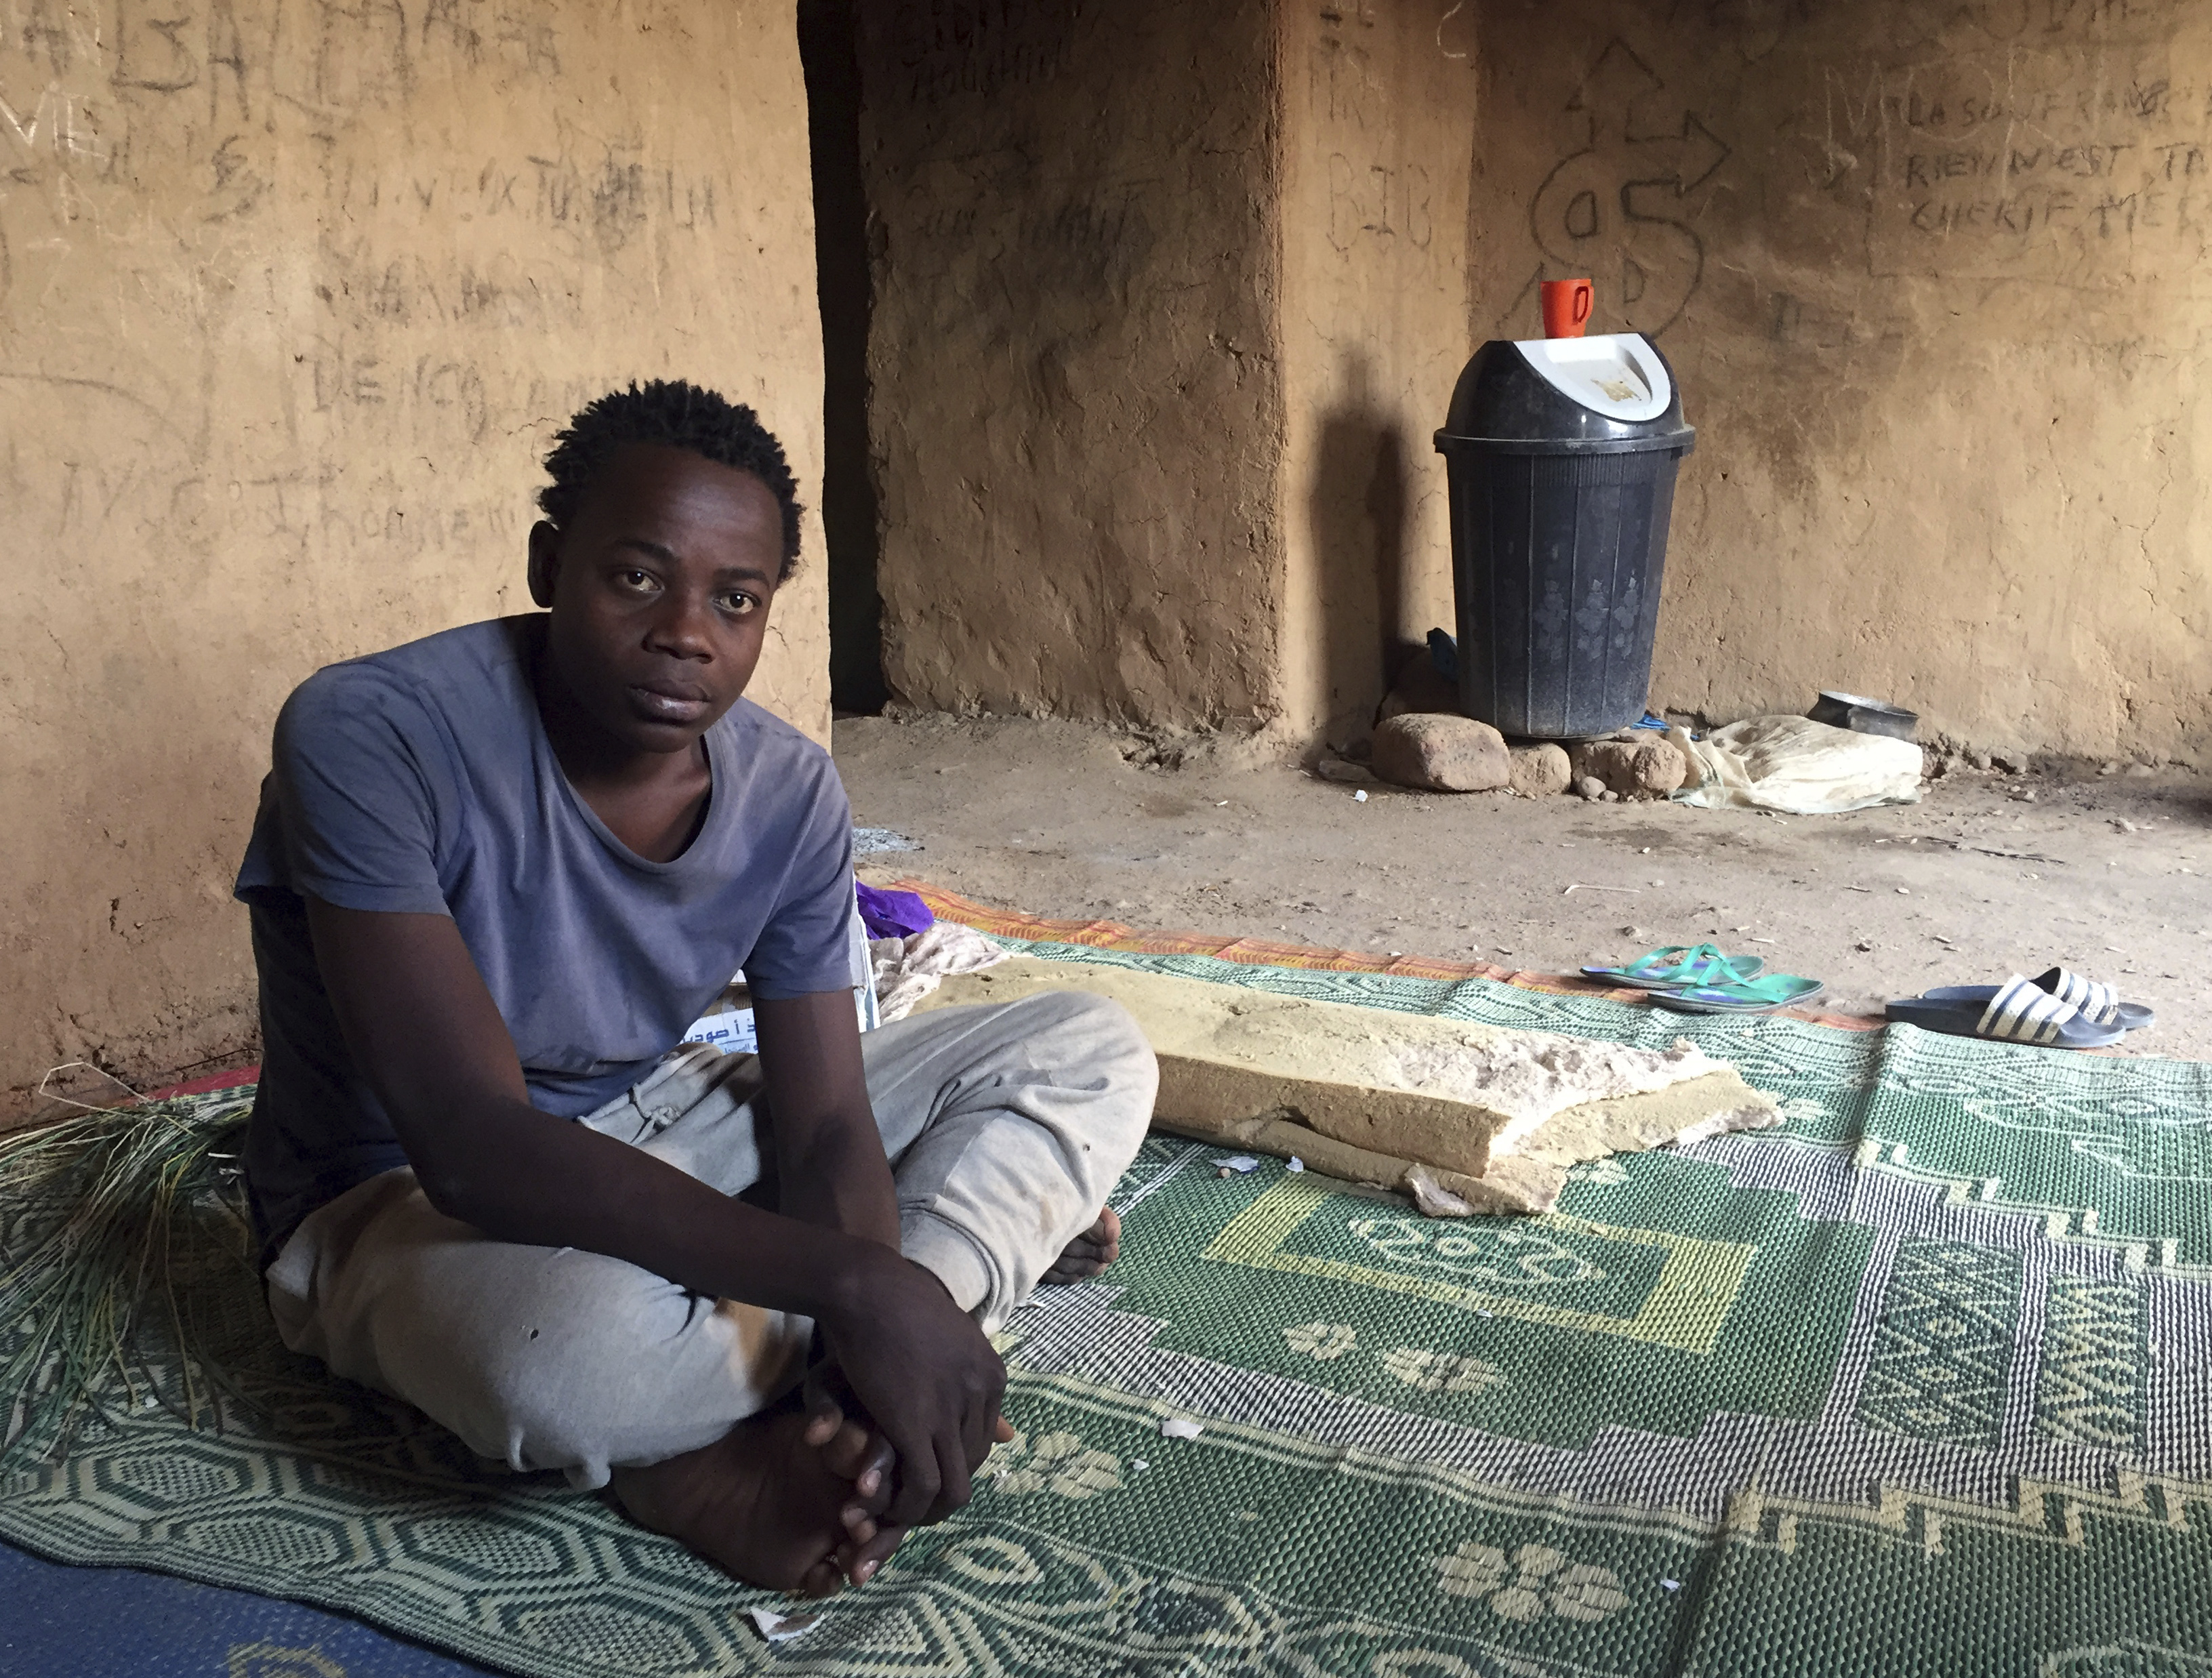 A 17-year-old migrant from the West African Ivory Coast sitting in a ghetto of the Niger city Agadez, a transition point for refugees on the edge of the Sahara, in Agadez, Niger, 27 October 2017. Photo by: Kristin Palitza/picture-alliance/dpa/AP Images